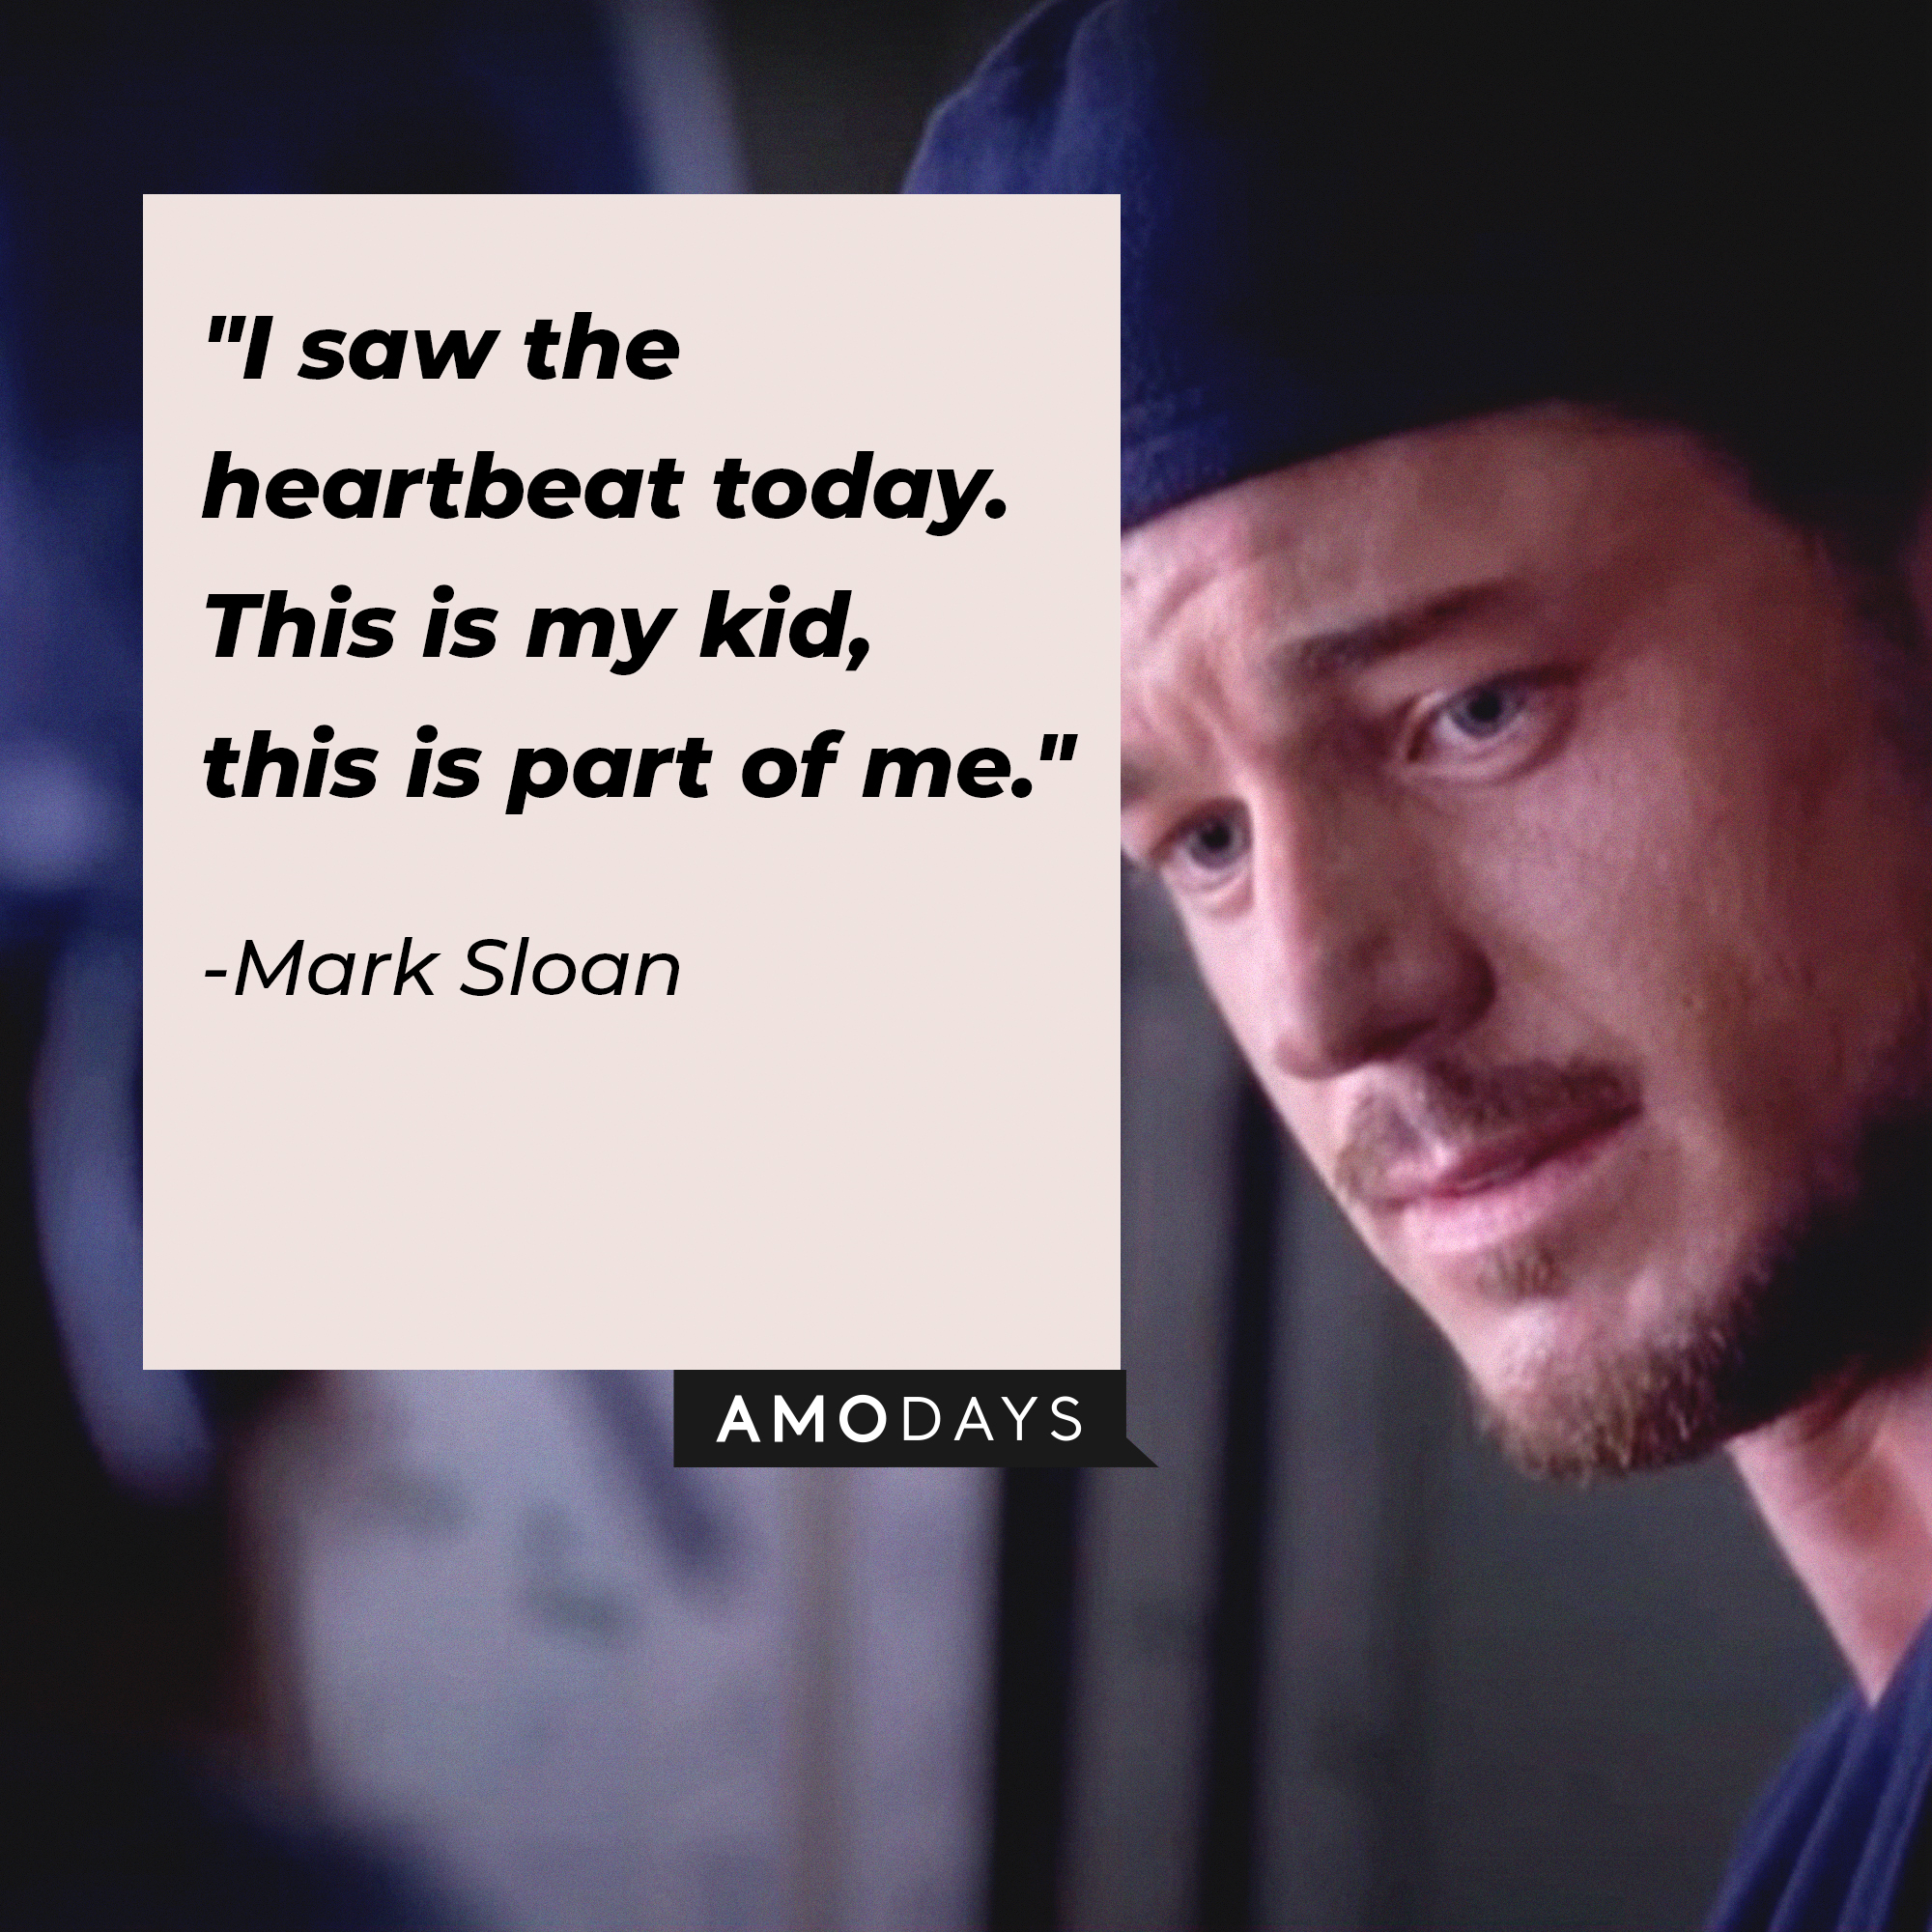 Mark Sloan's quote: "I saw the heartbeat today. This is my kid, this is part of me." | Image: AmoDays